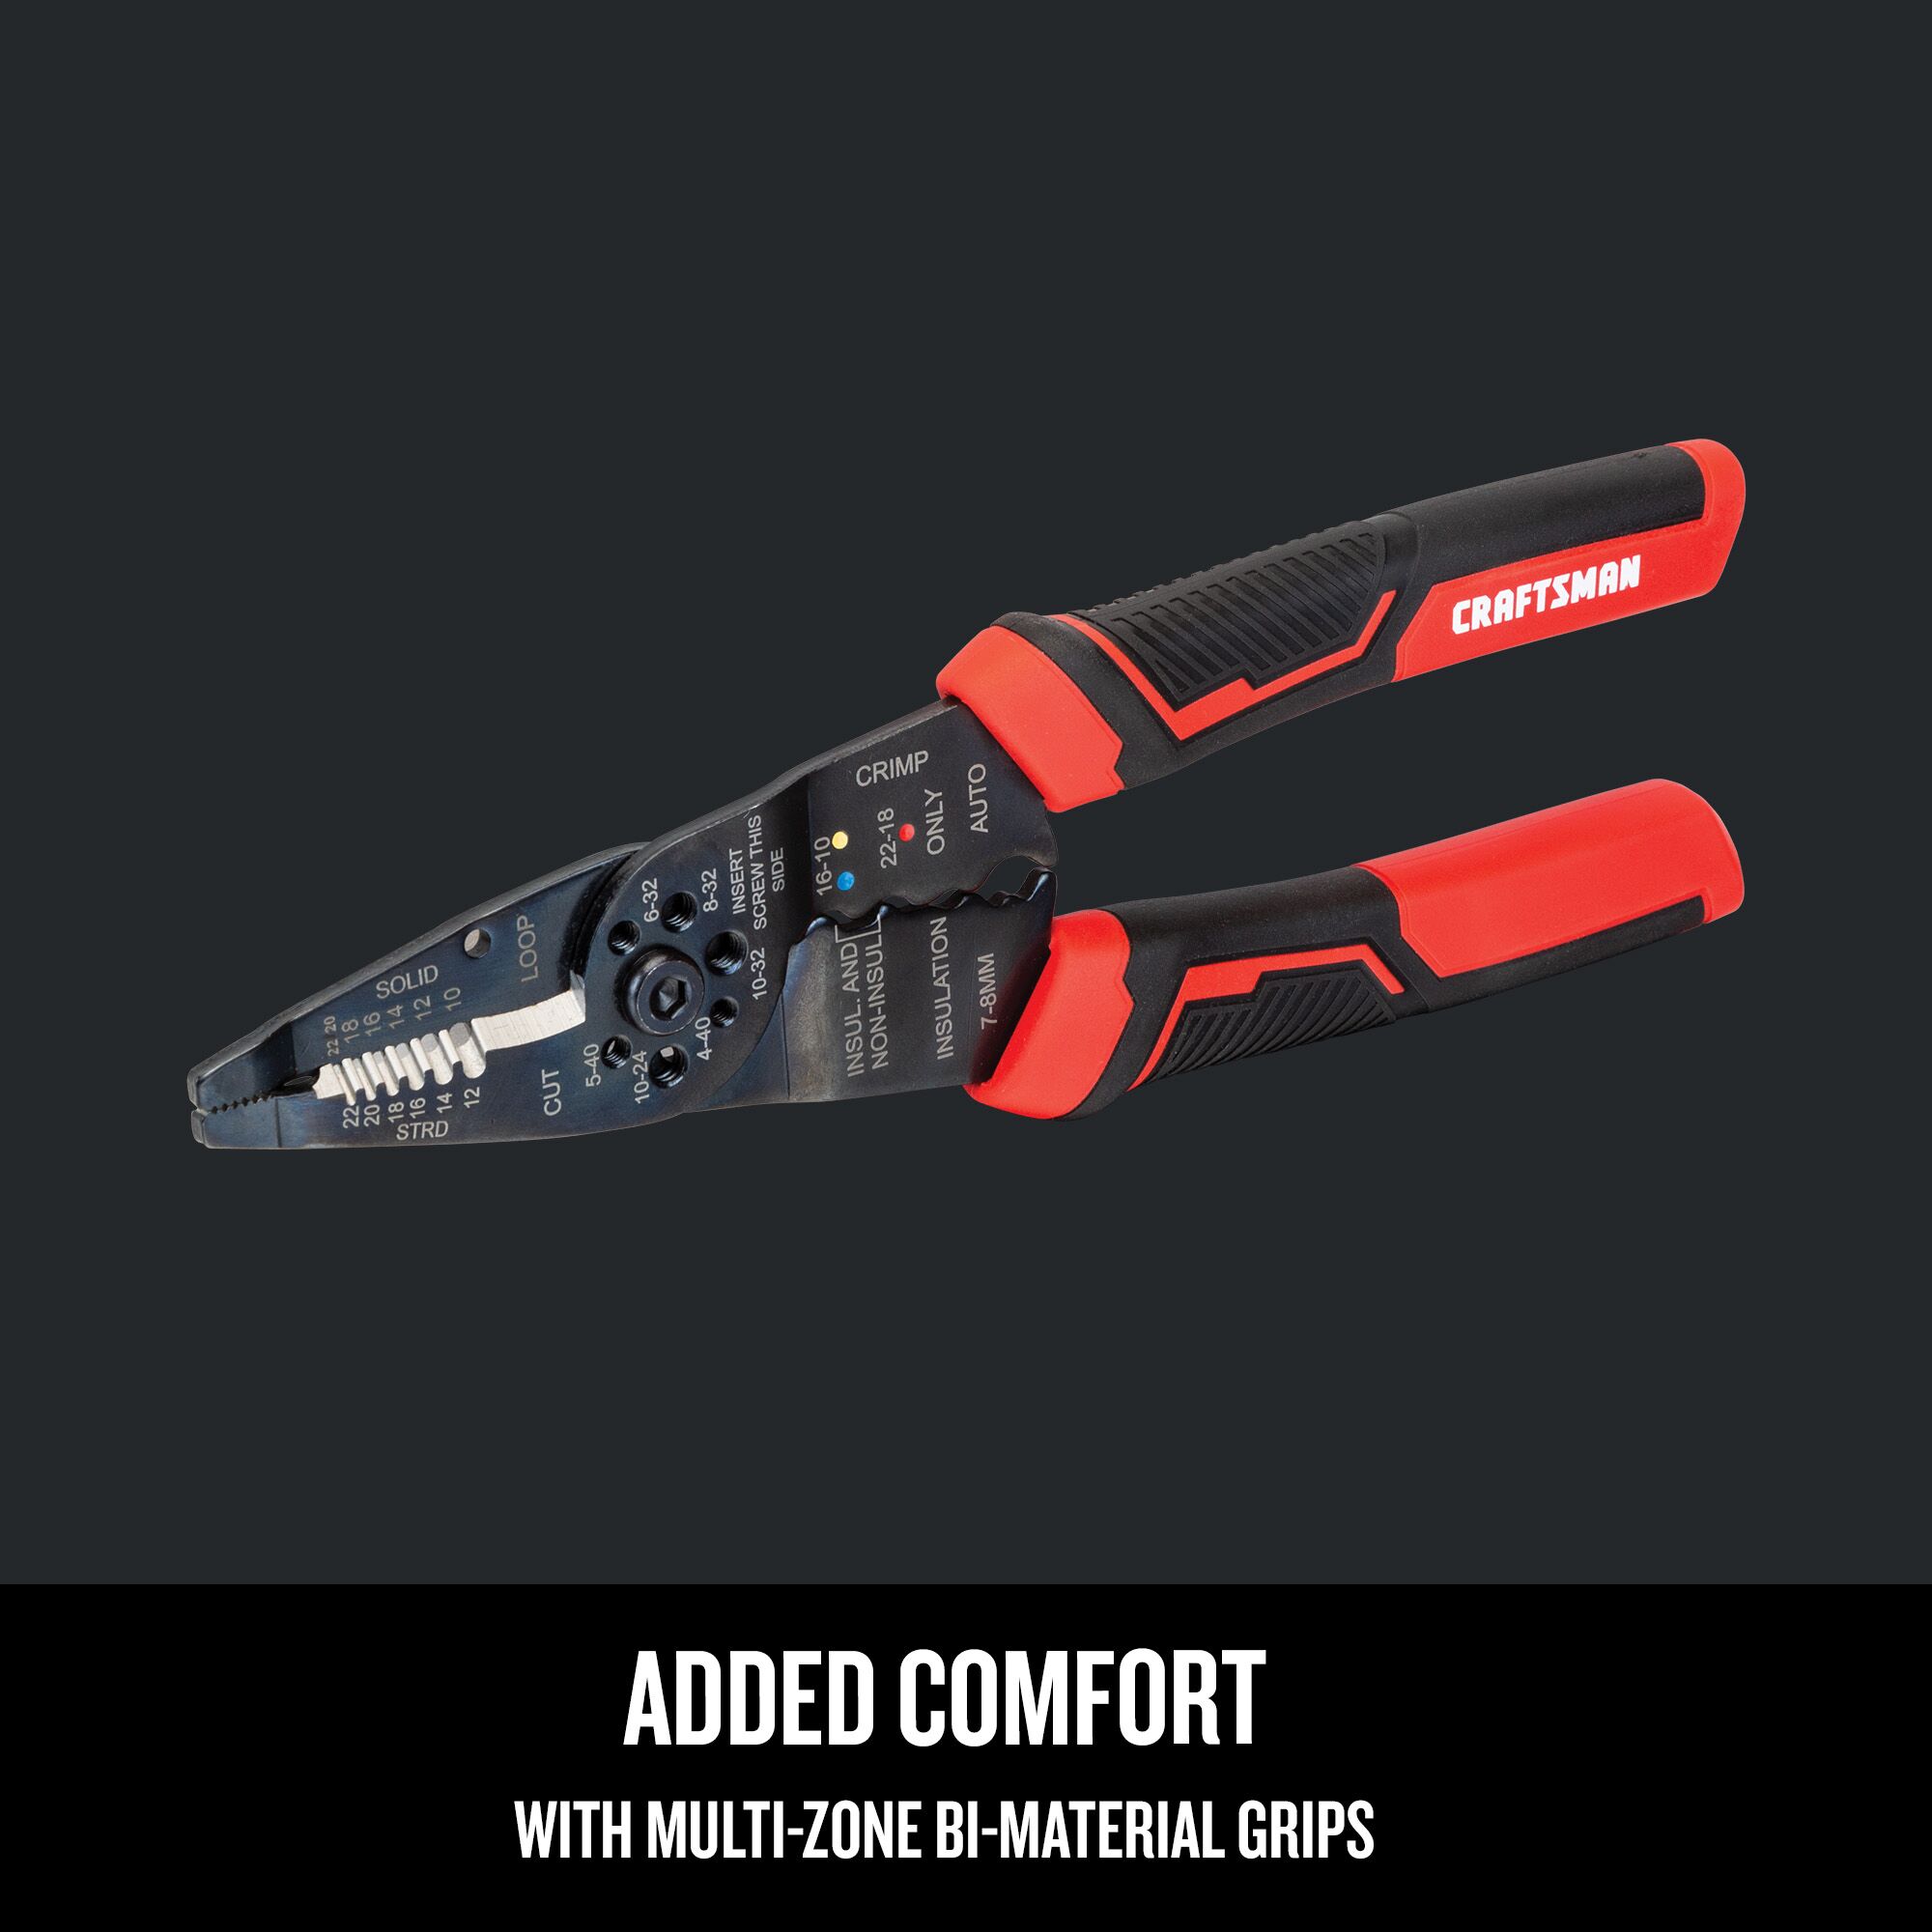 Graphic of CRAFTSMAN Wire Crimper highlighting product features